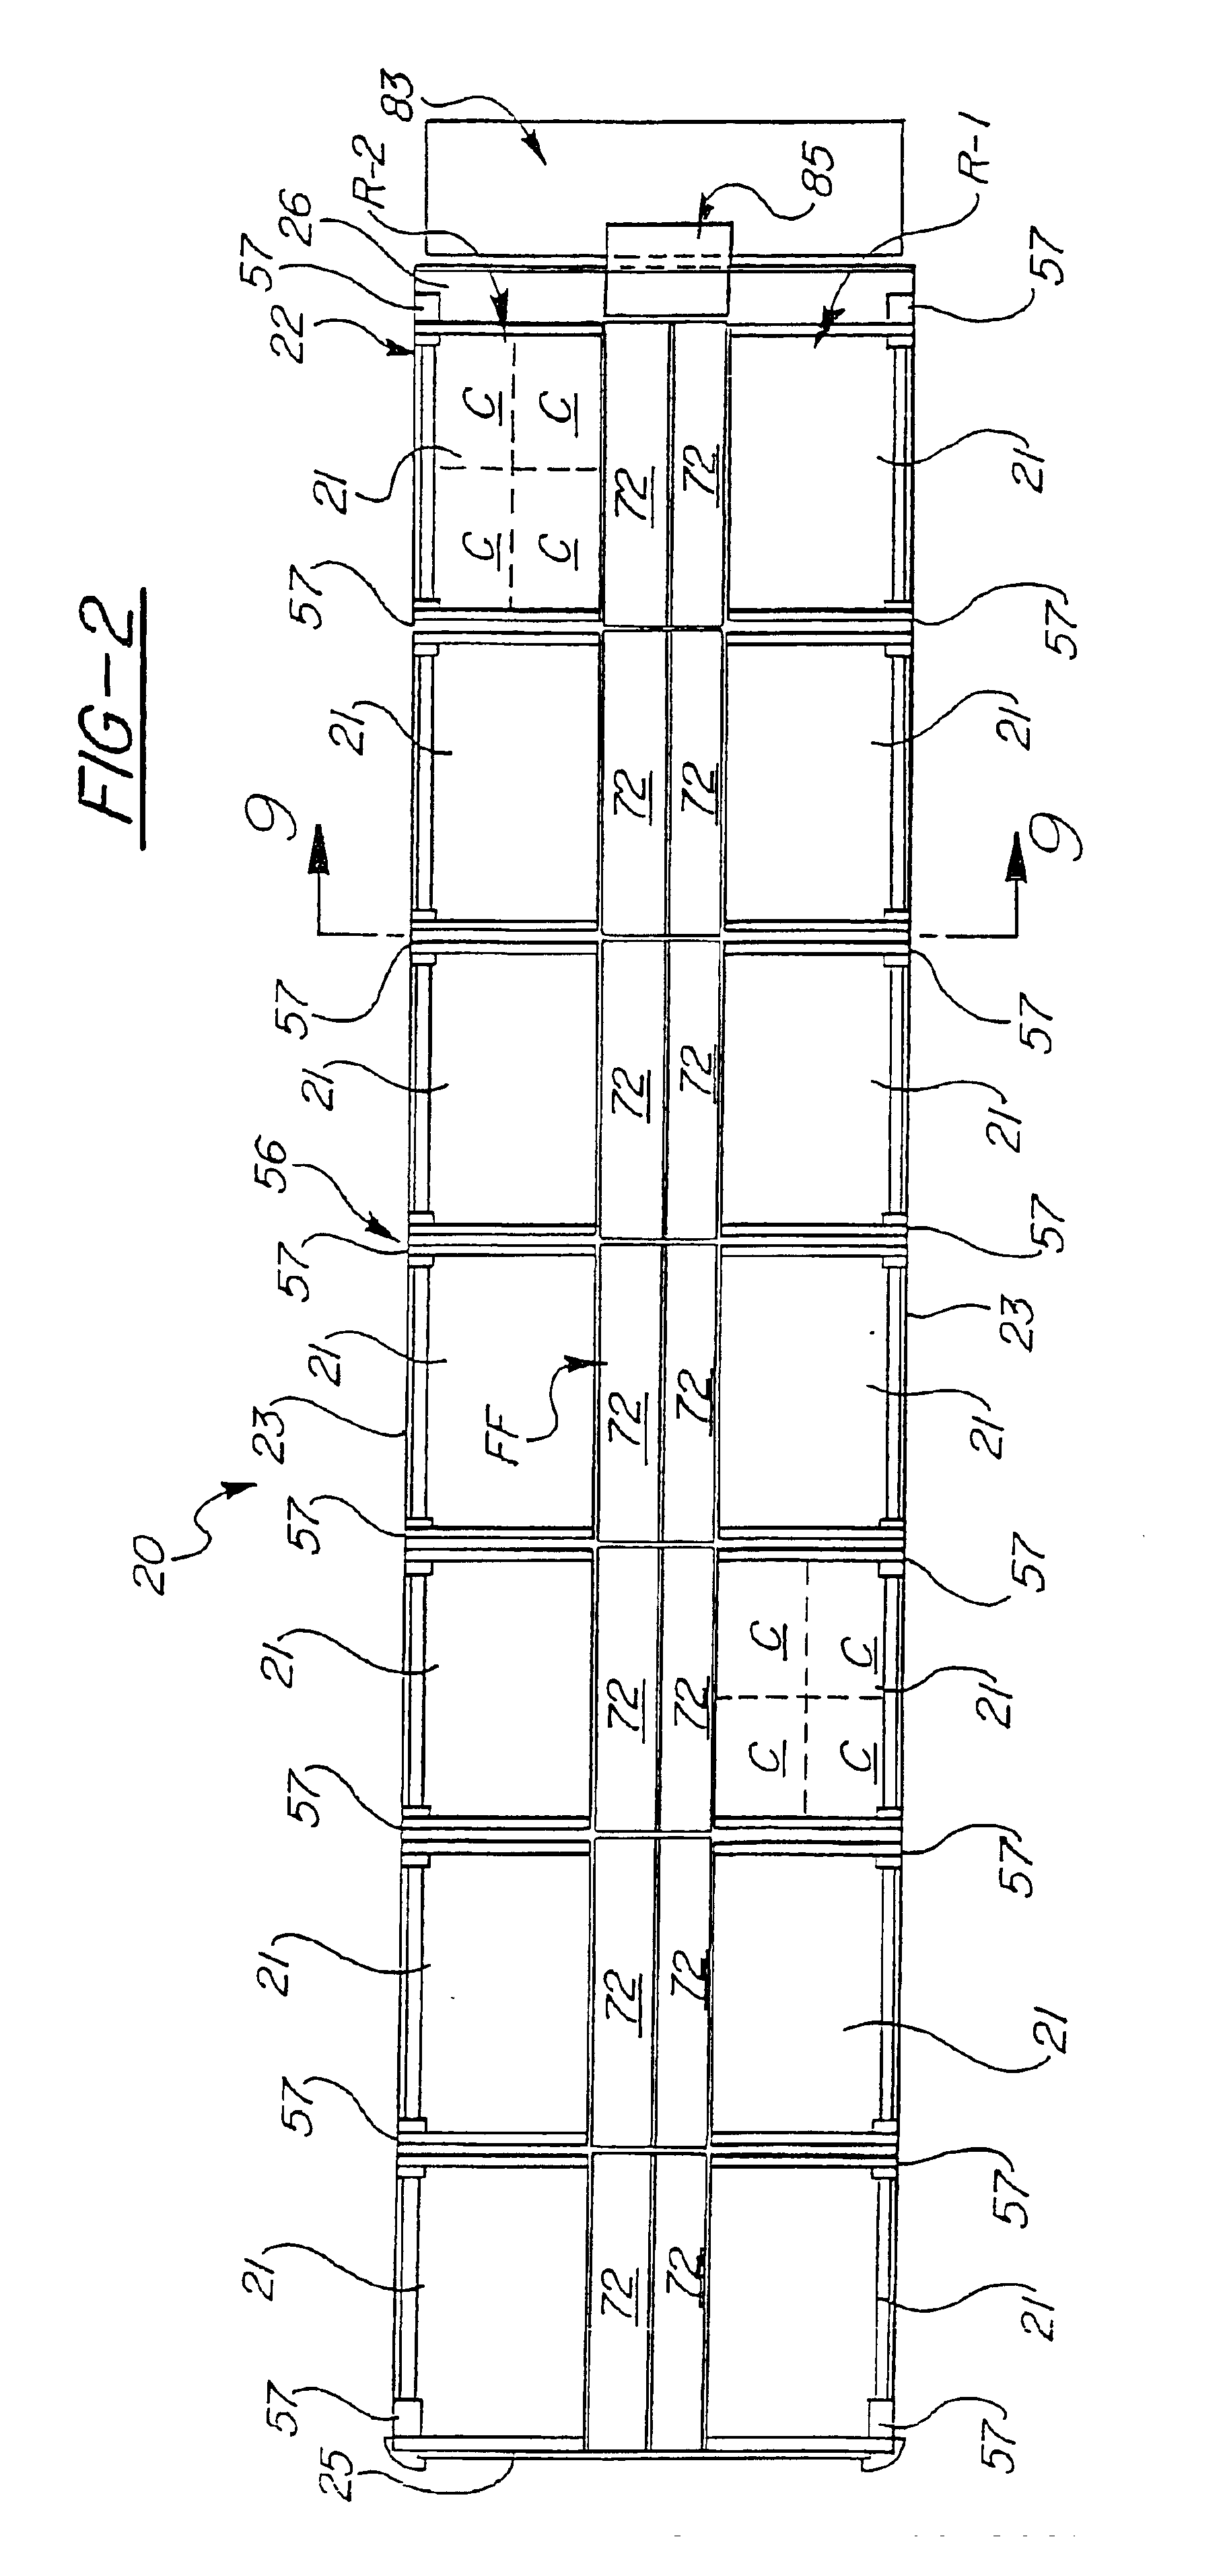 Transport cart system and method of its manufacture and operation